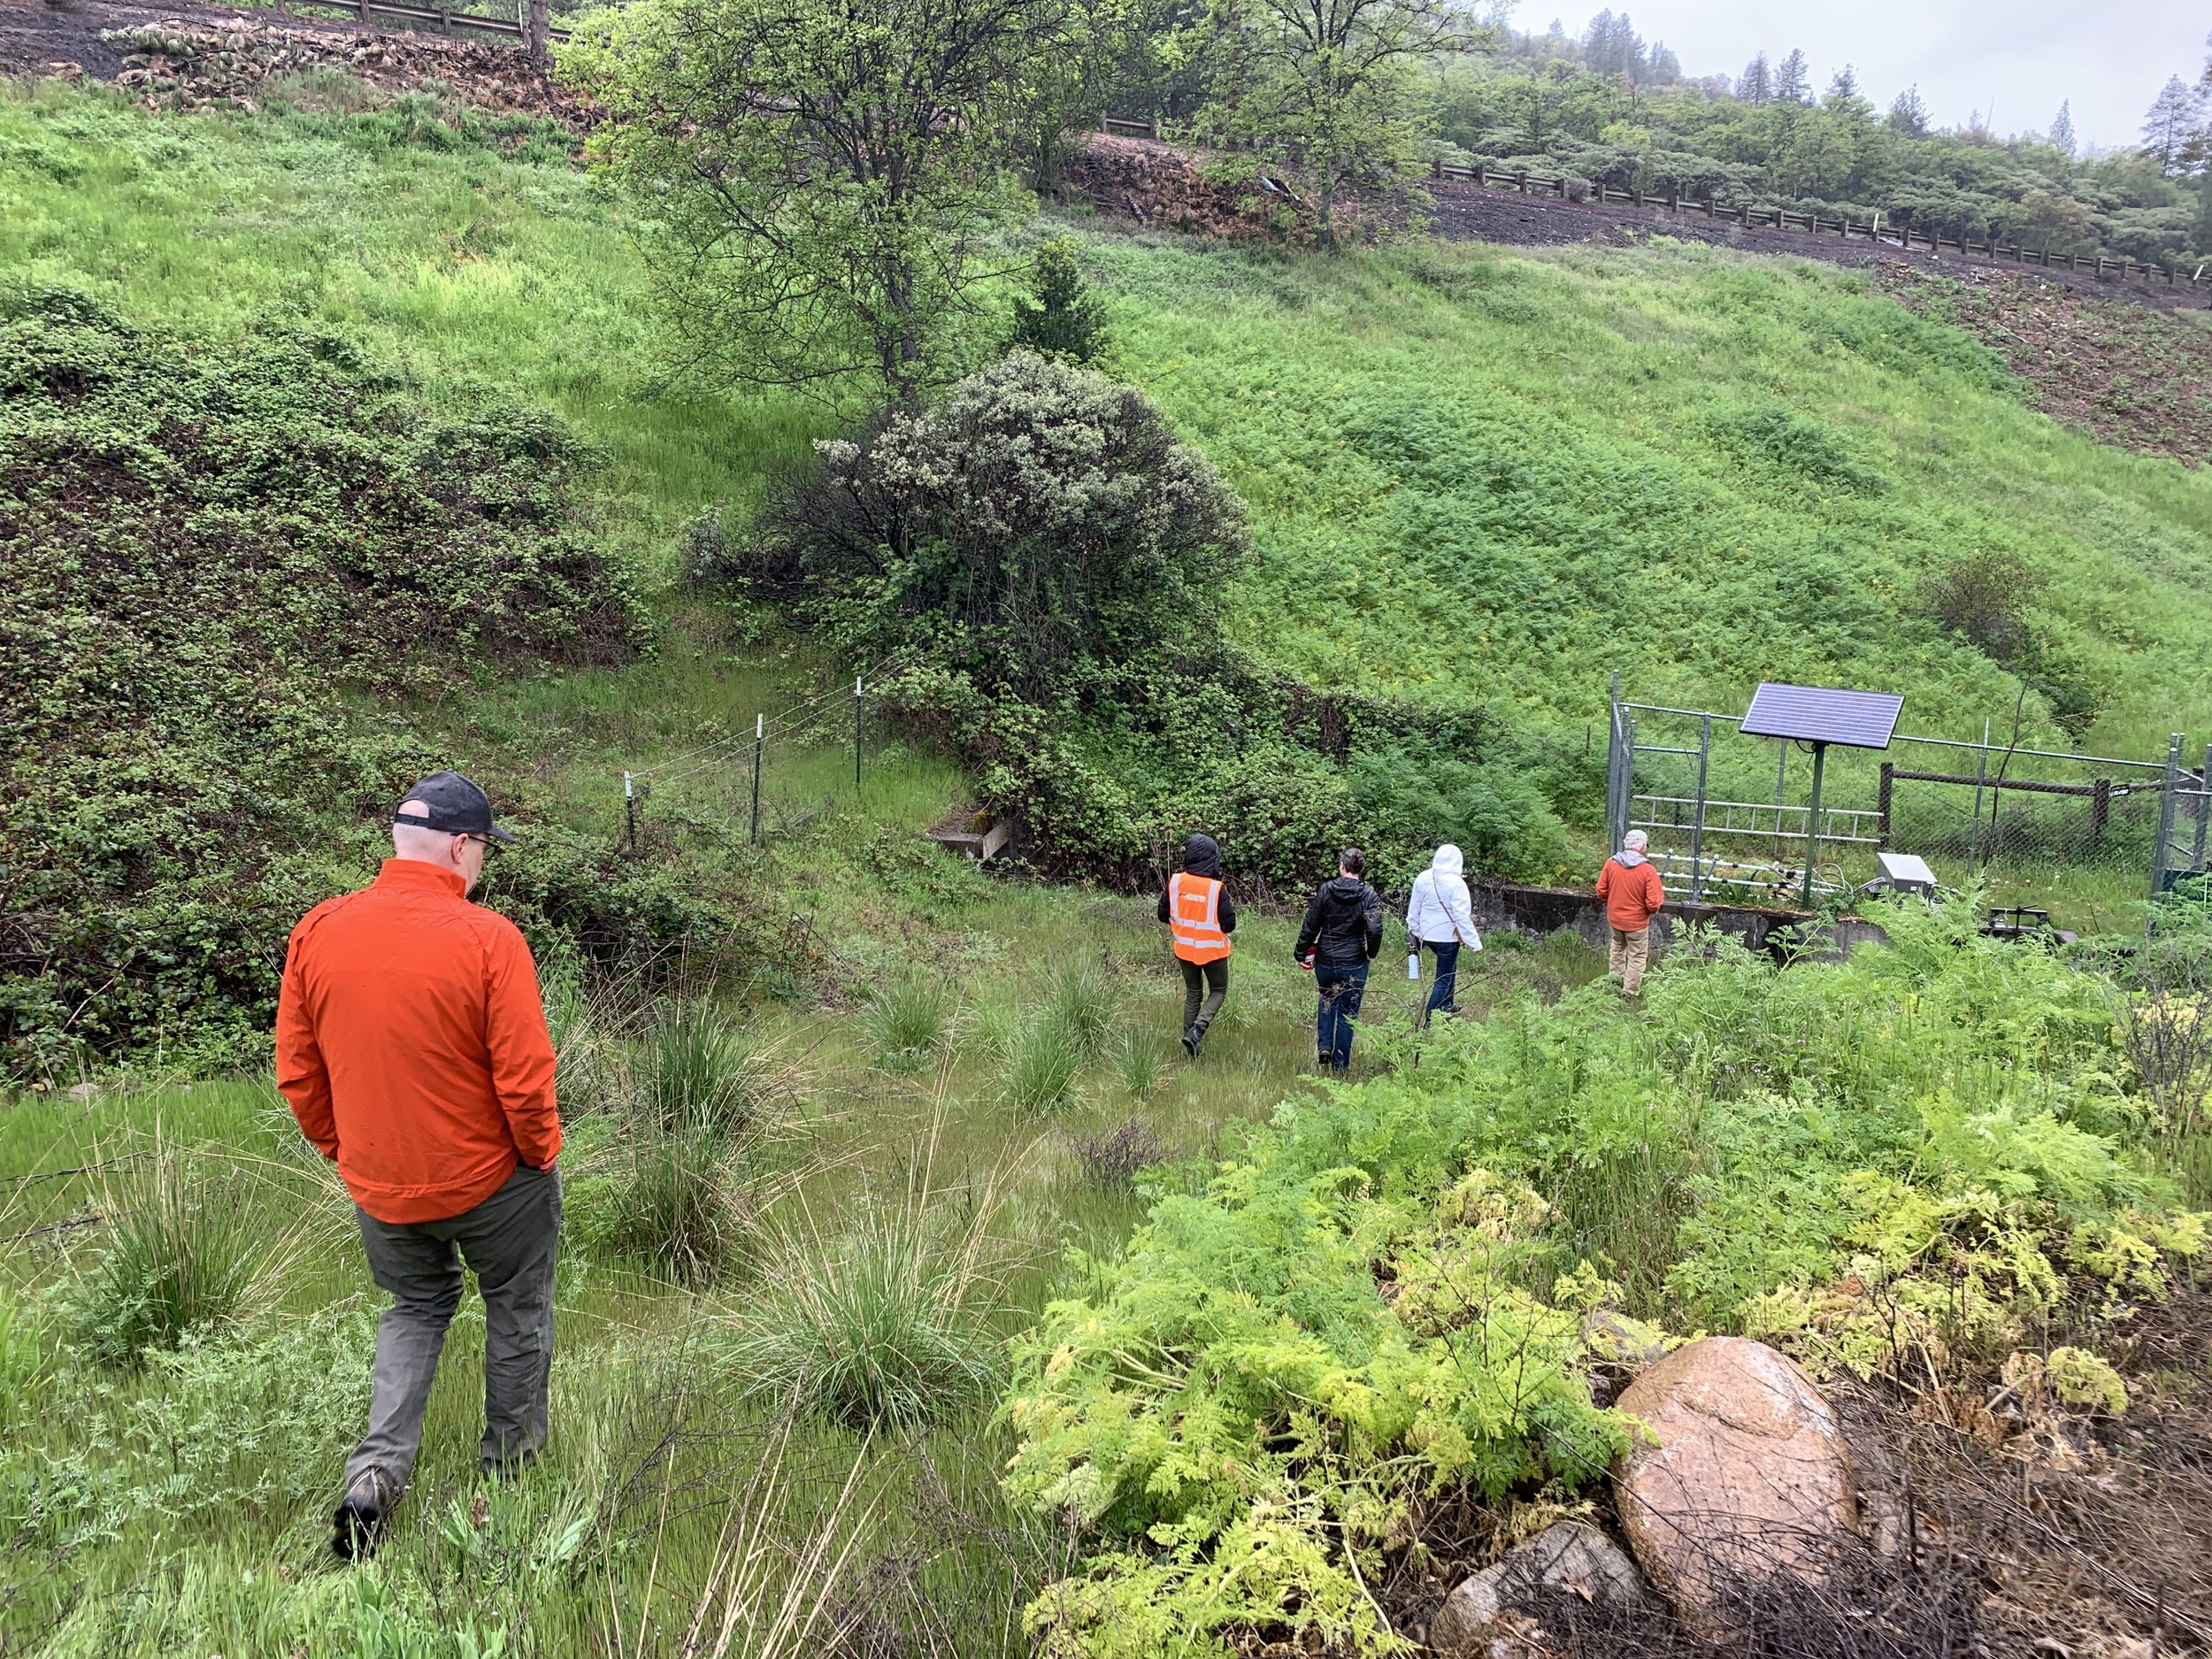  Wildlands Network's Pacific-based staff attended an I-5 site visit with the Southern Oregon Crossing Coalition, which works to enhance wildlife movement and reduce wildlife-vehicle collisions on I-5 from Ashland to the California-Oregon border. 